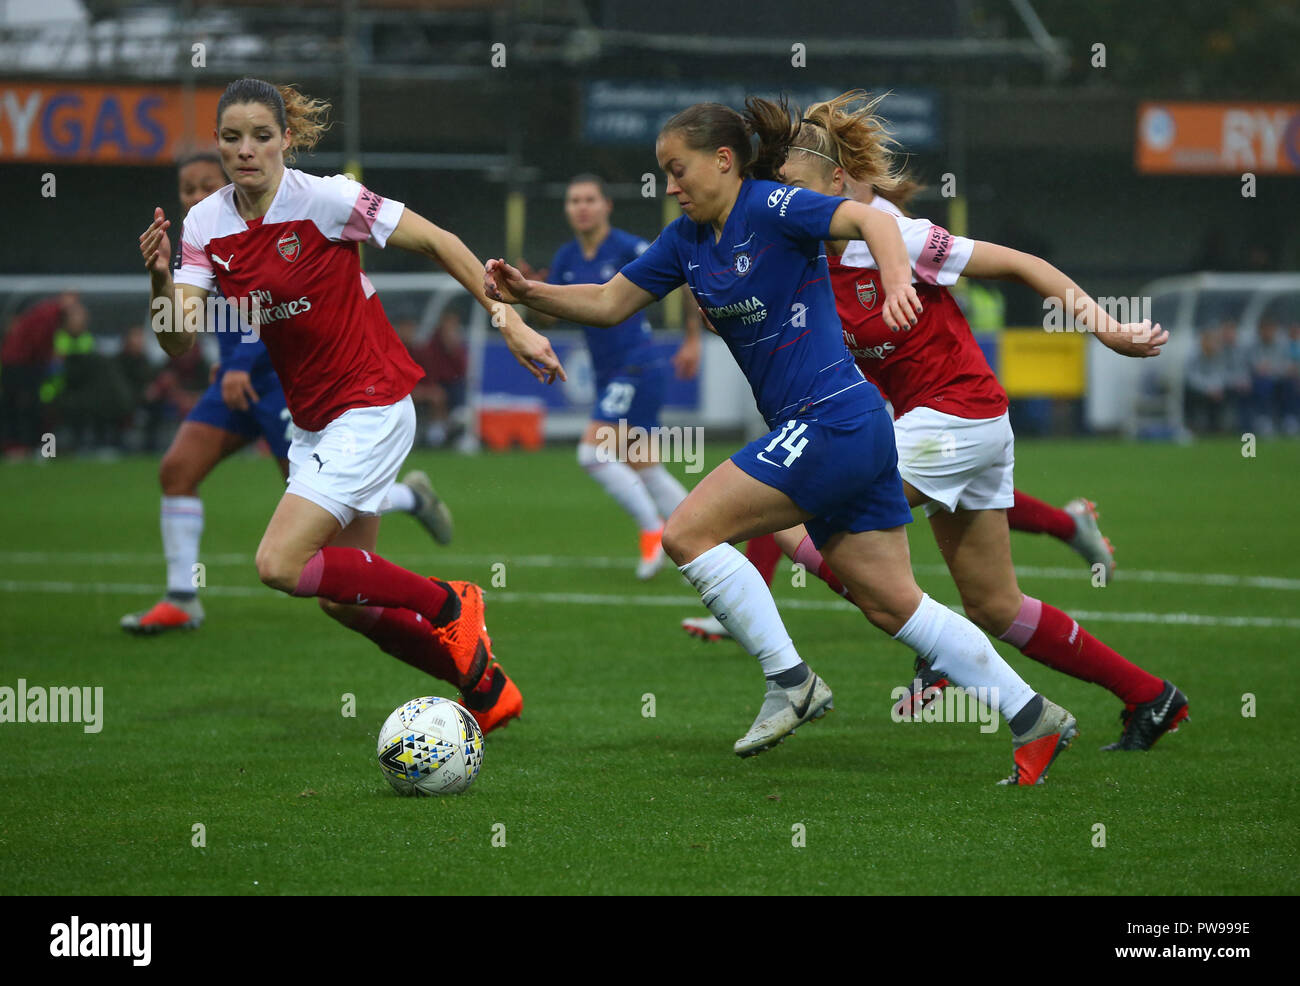 Kingston upon Thames, UK. October 14. 2018 Chelsea Ladies Fran Kirby during The FA Women's Super League match between Chelsea FC Women and Arsenal at Kingsmeadow Stadium, Kingston upon Thames, England on 14 Oct 2018.  Credit Action Foto Sport Credit: Action Foto Sport/Alamy Live News Stock Photo